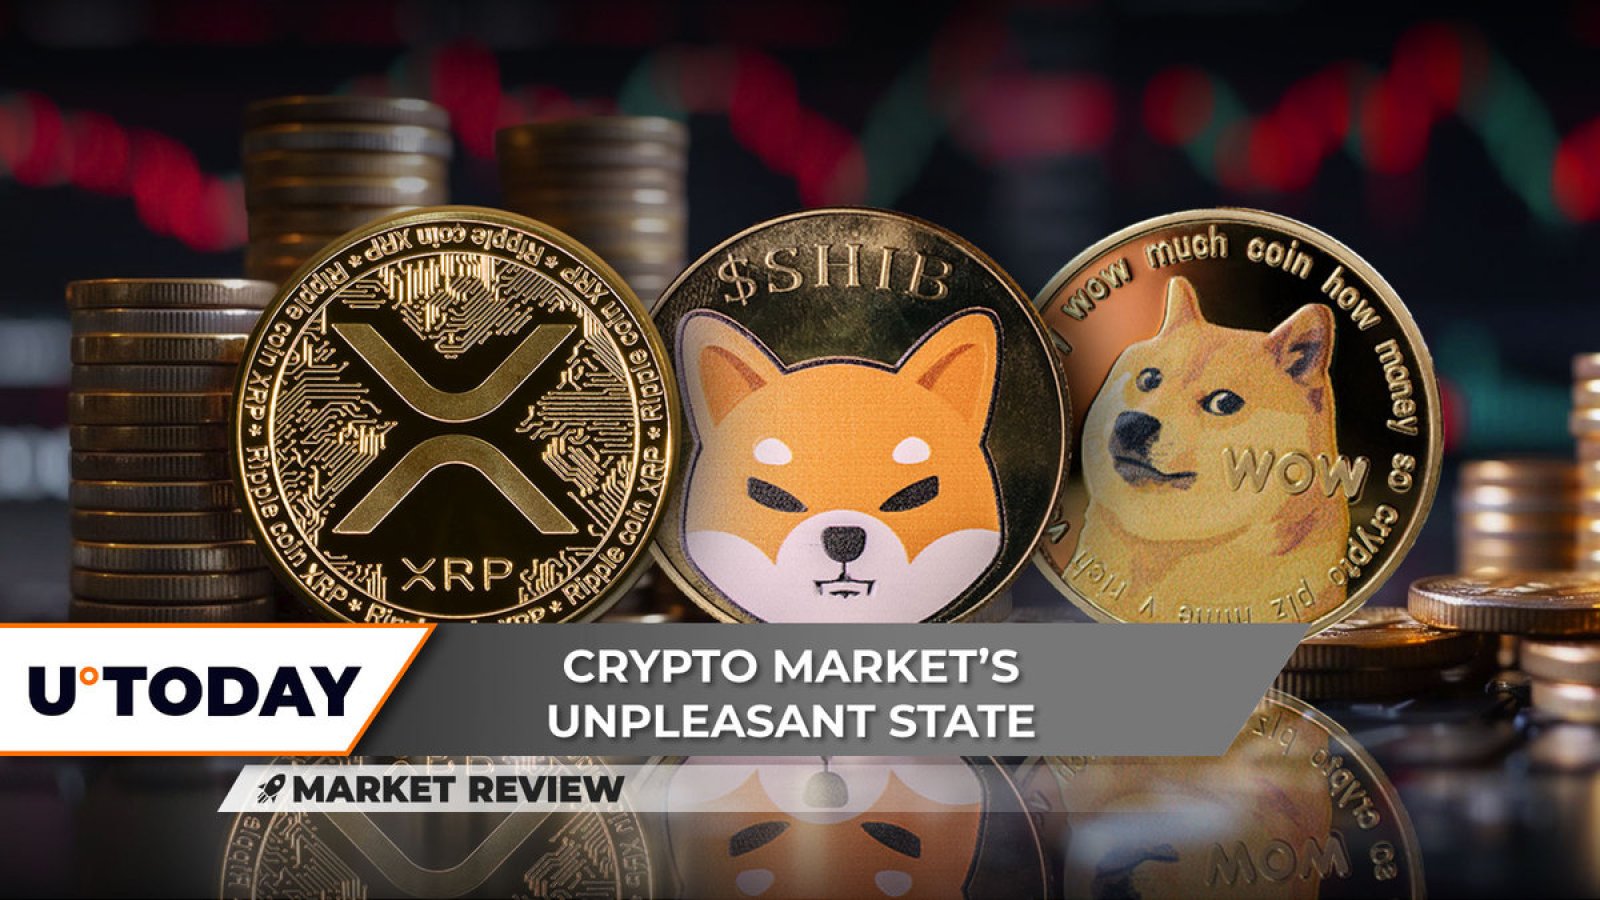 Dogecoin's (DOGE), in a better position, joins the market comeback and Shiba Inu’s (SHIB).